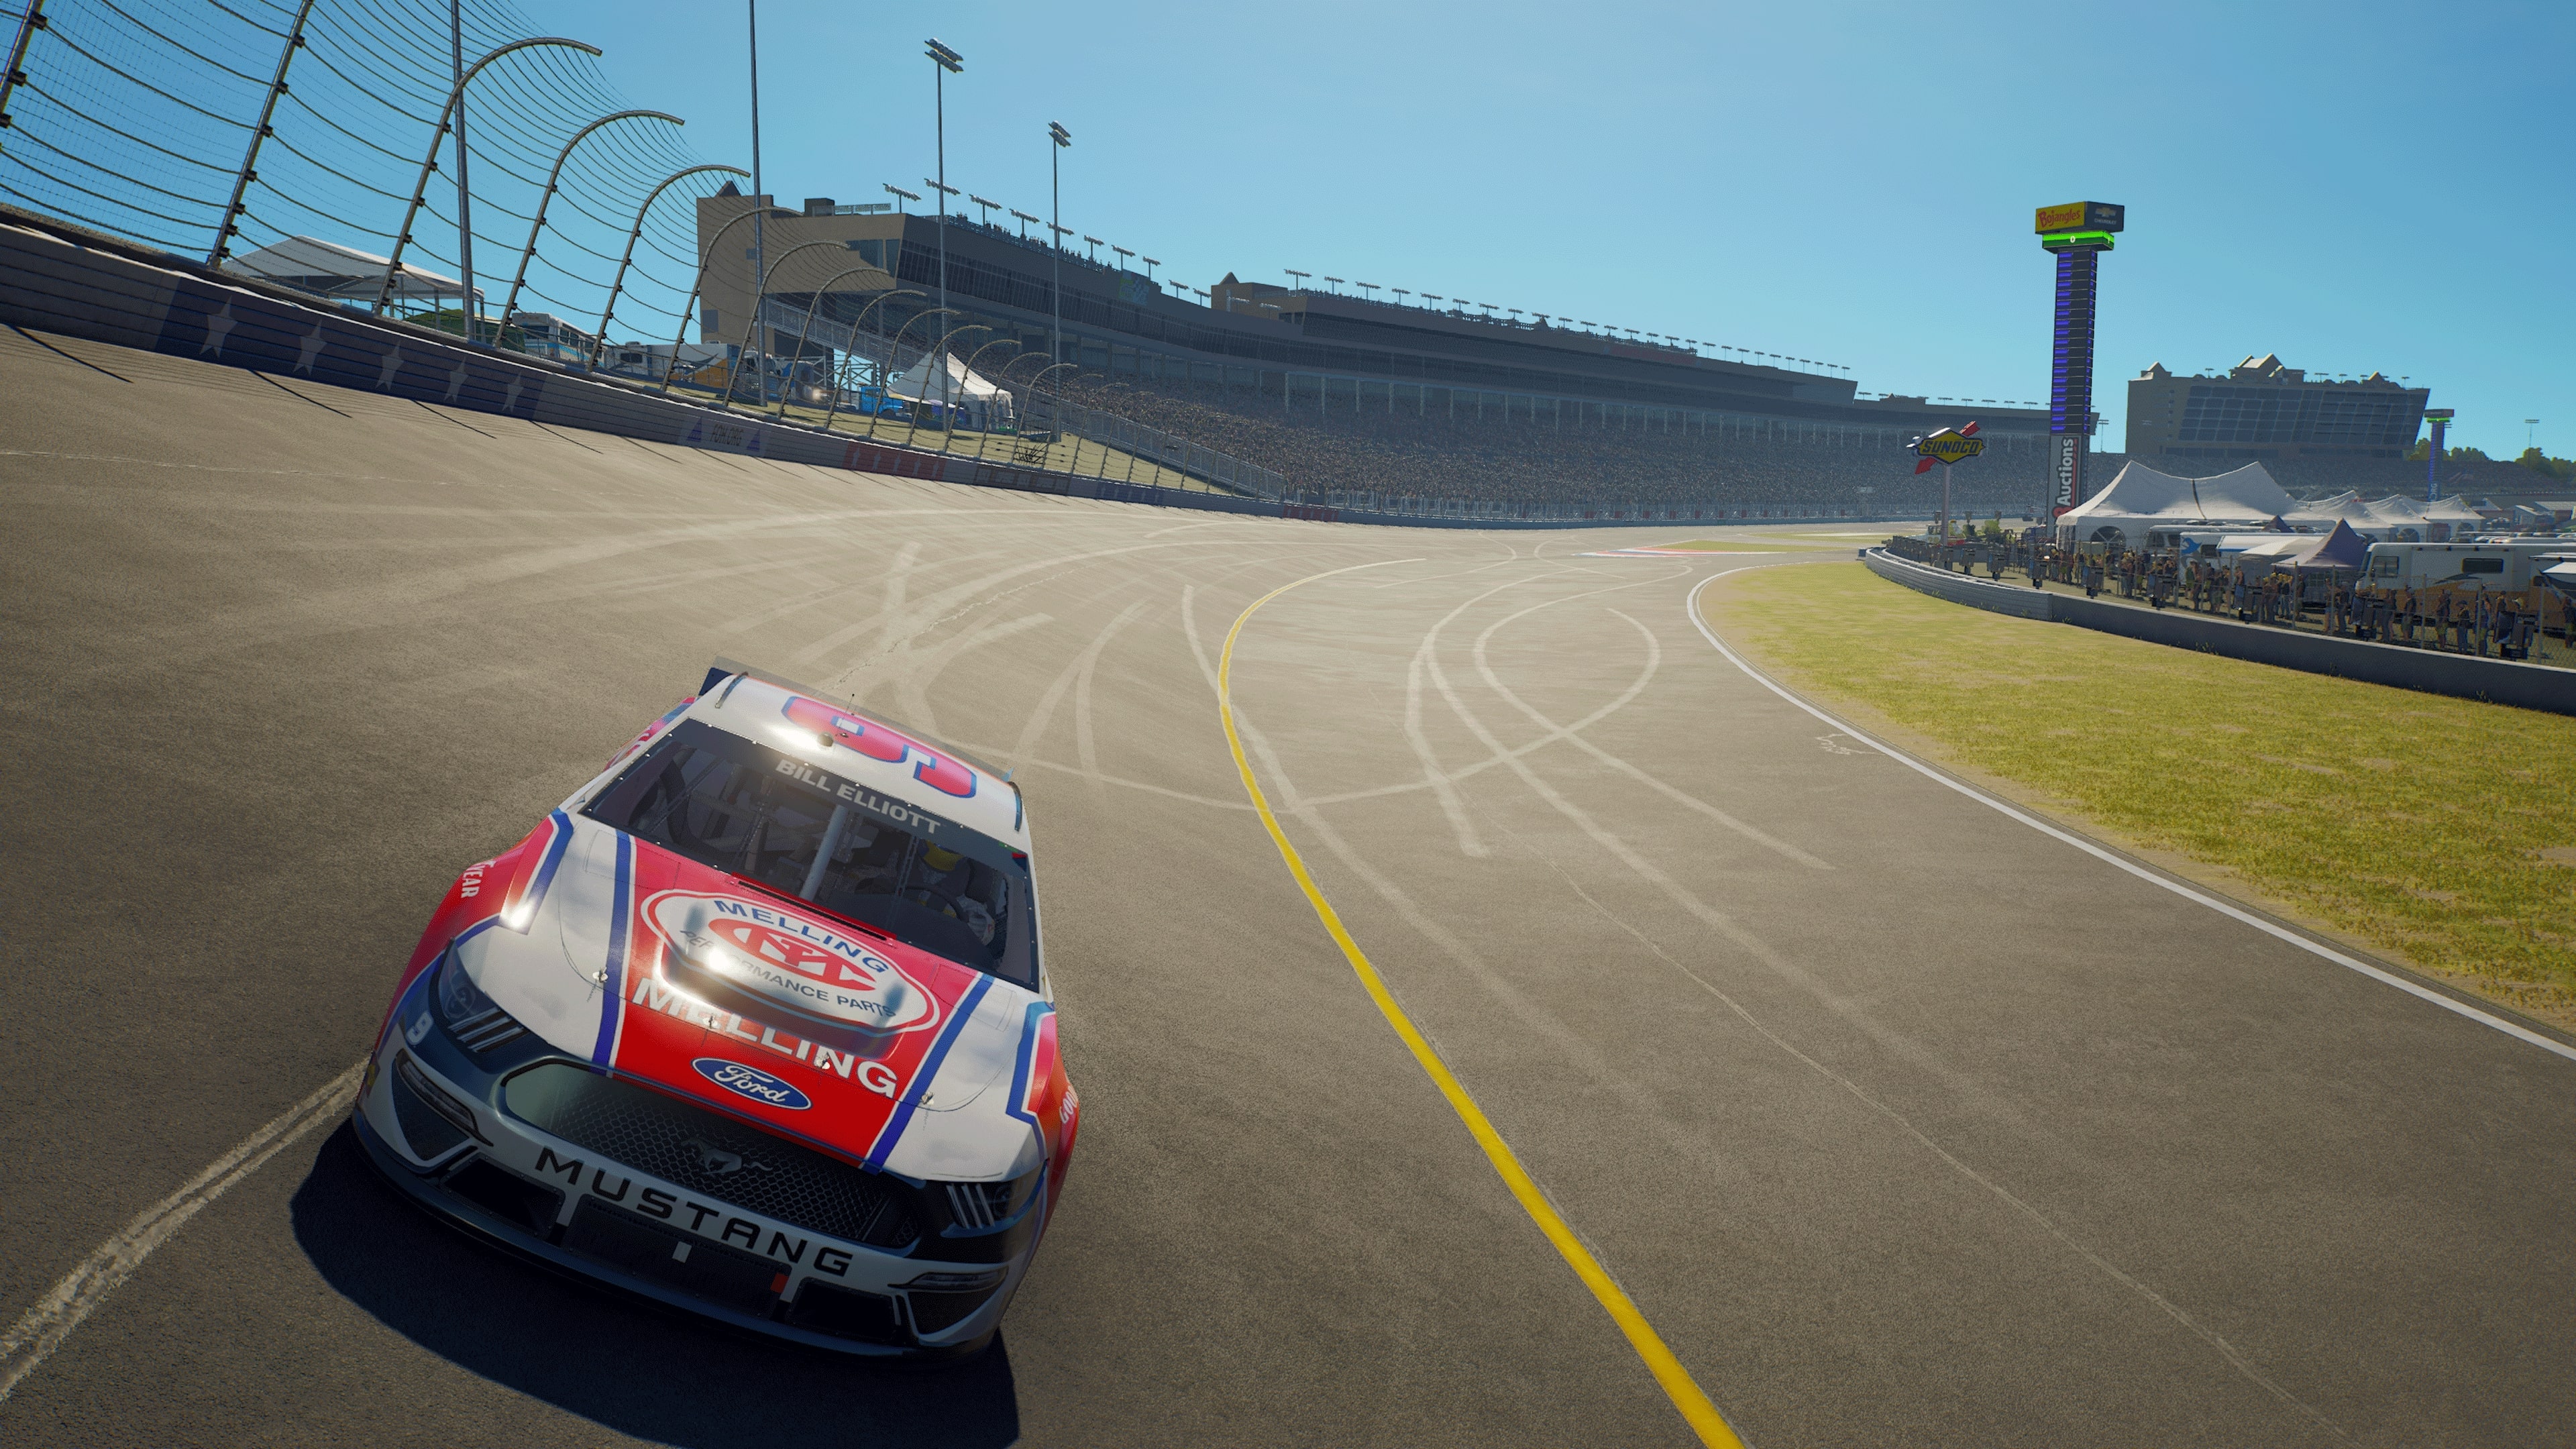 Nascar 21 Ignition — Champions Edition on PS5 PS4 — price history, screenshots, discounts • USA